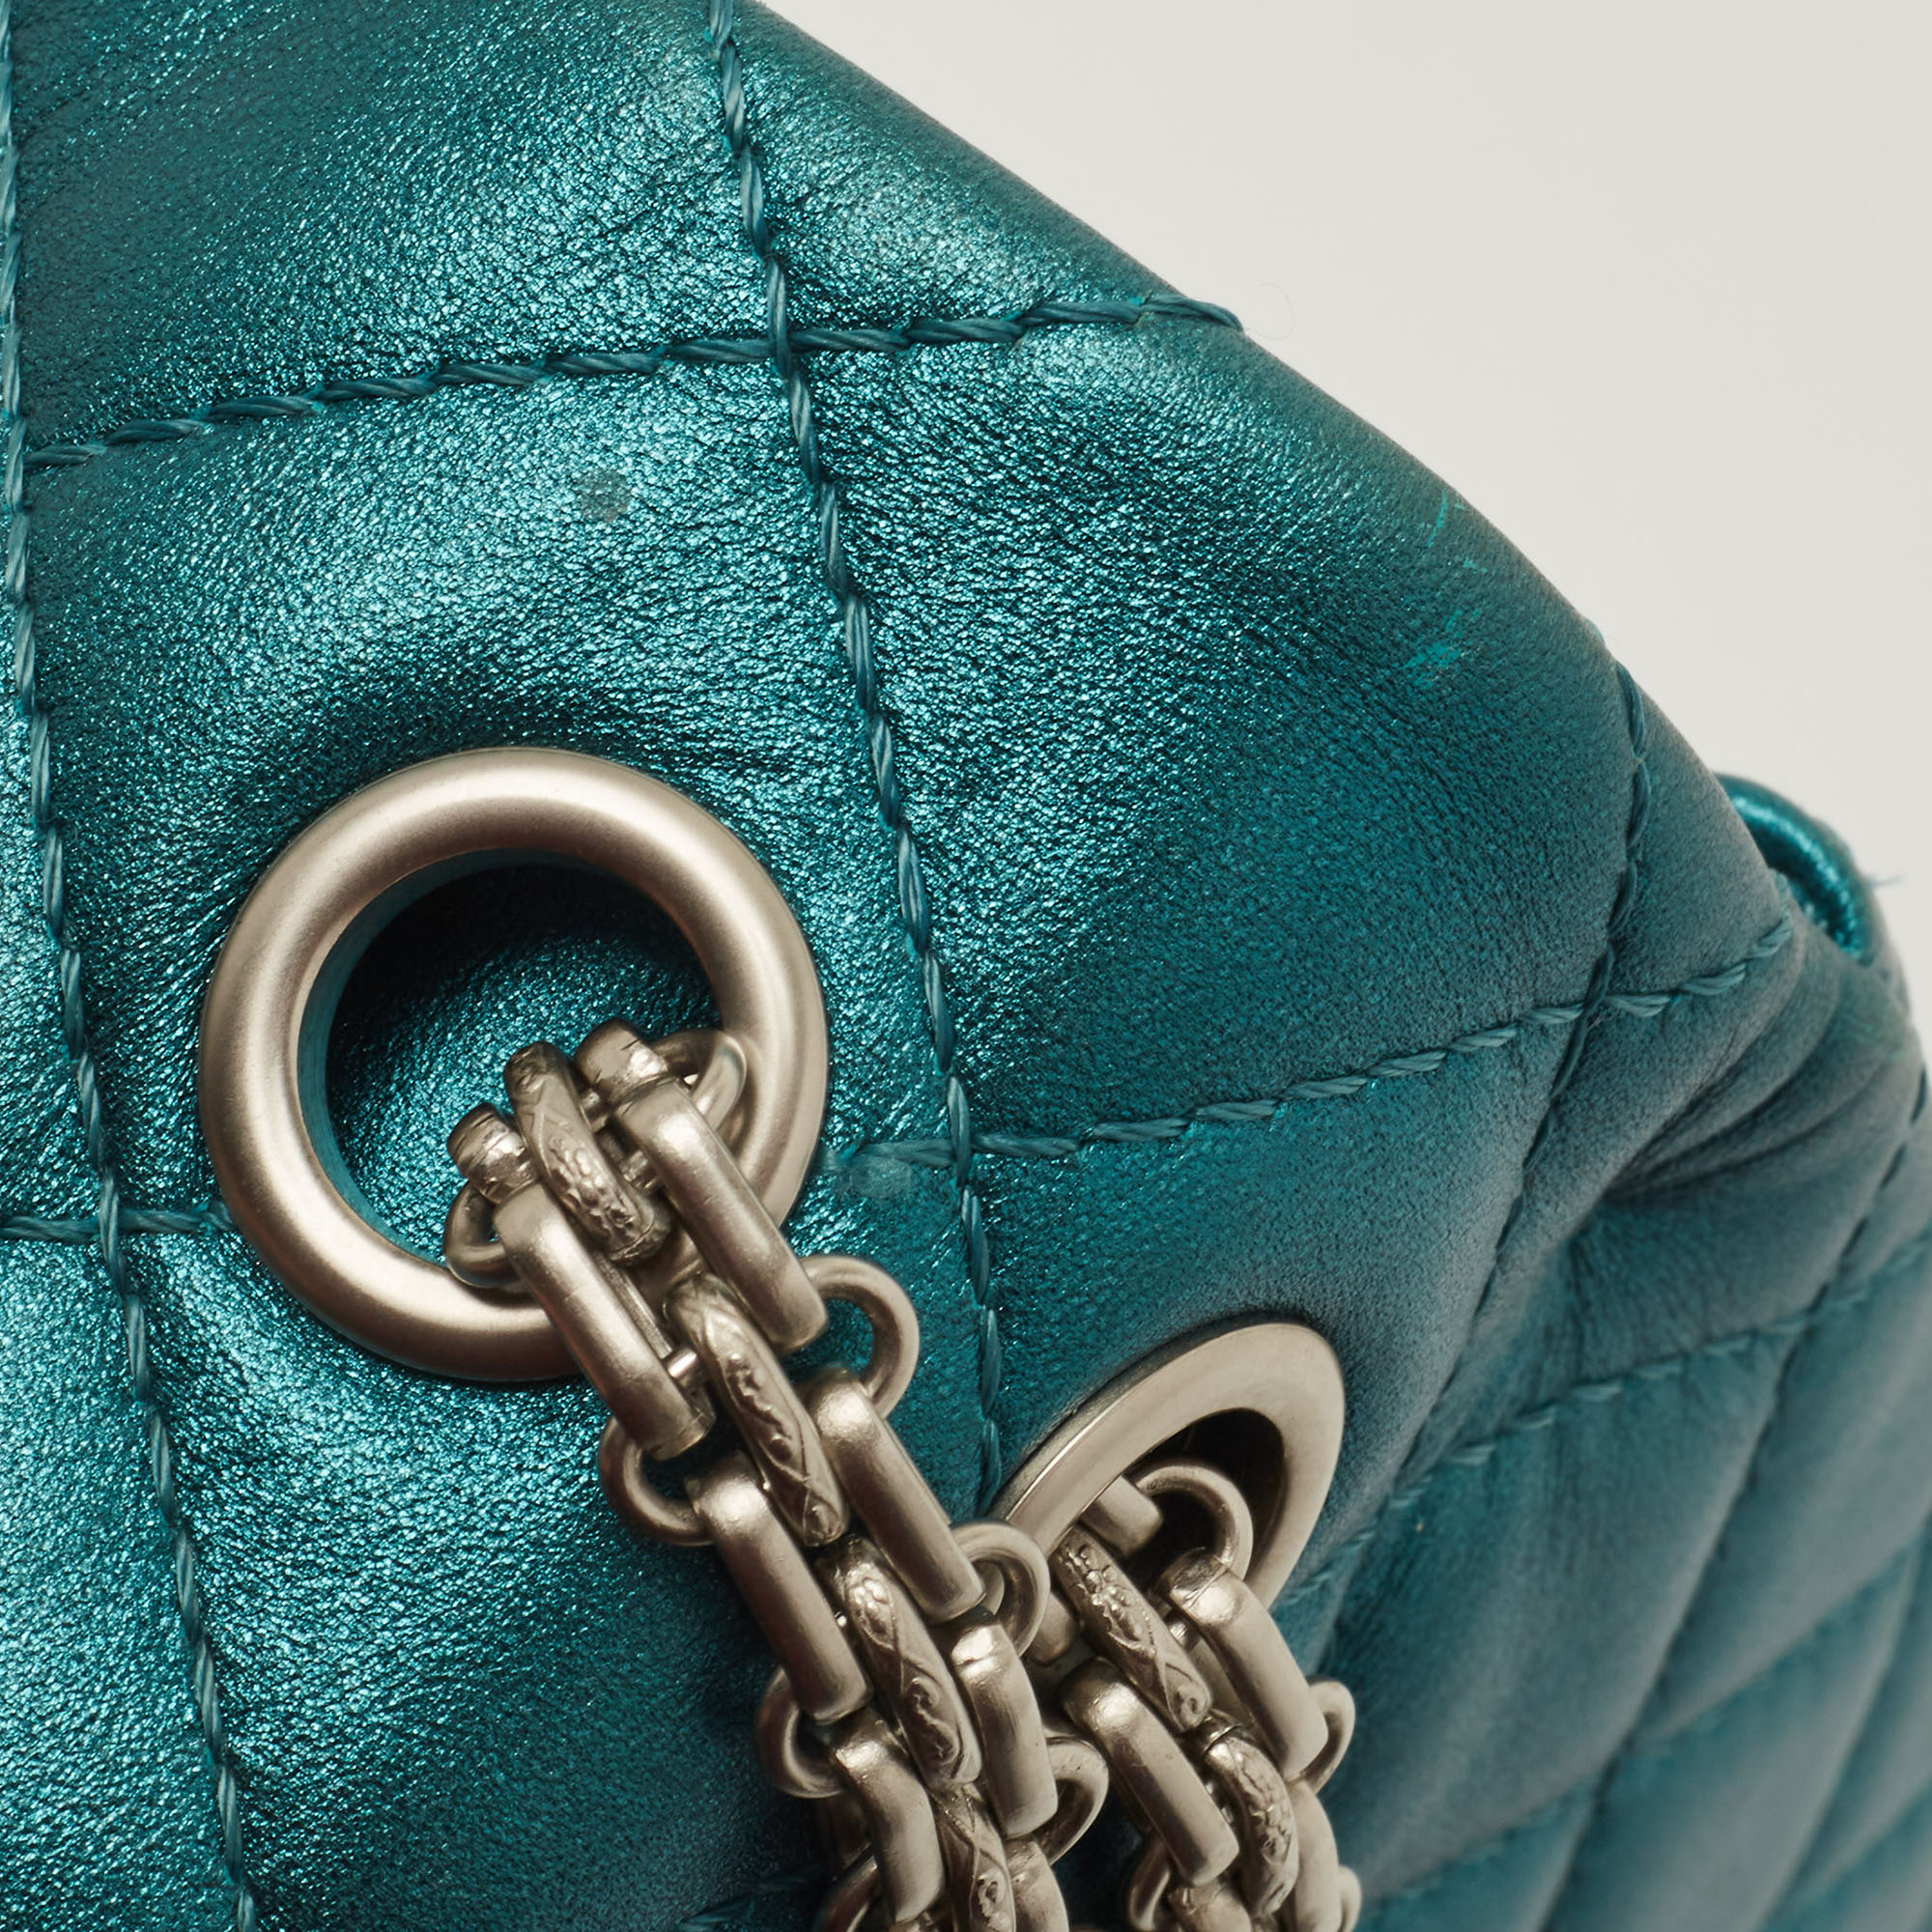 Chanel Metallic Teal Green Quilted Leather Reissue 2.55 Classic 226 Flap Bag